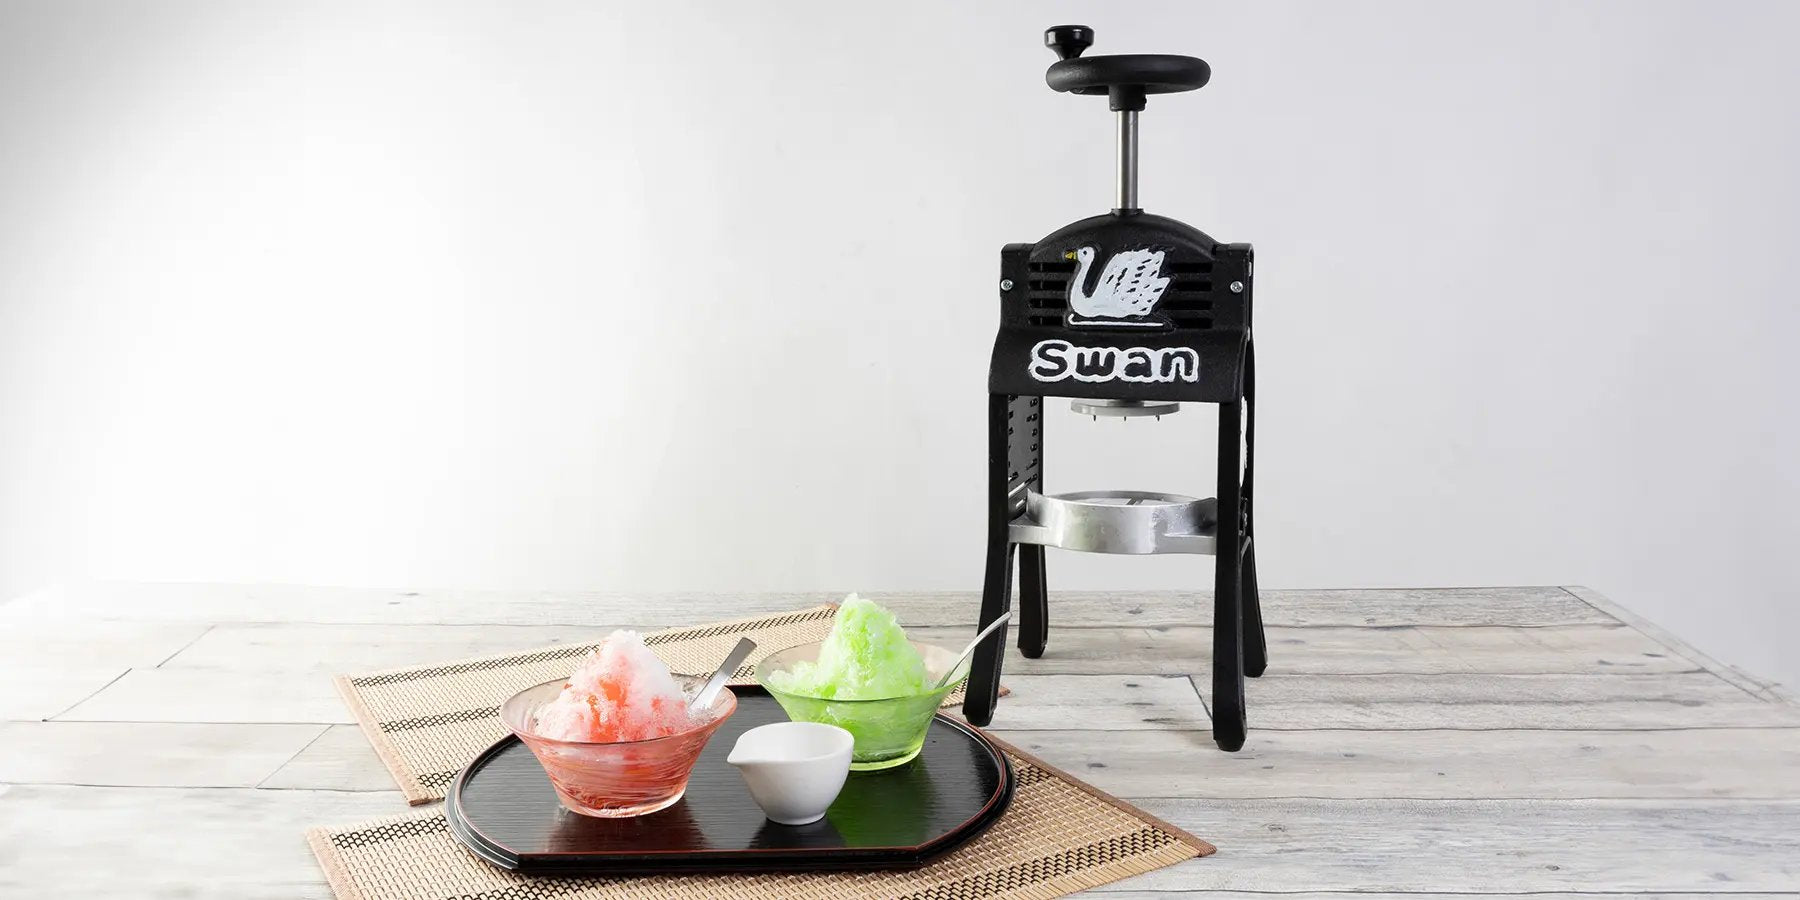 Discover our great selection of Shaved Ice Machines at Globalkitchen Japan.